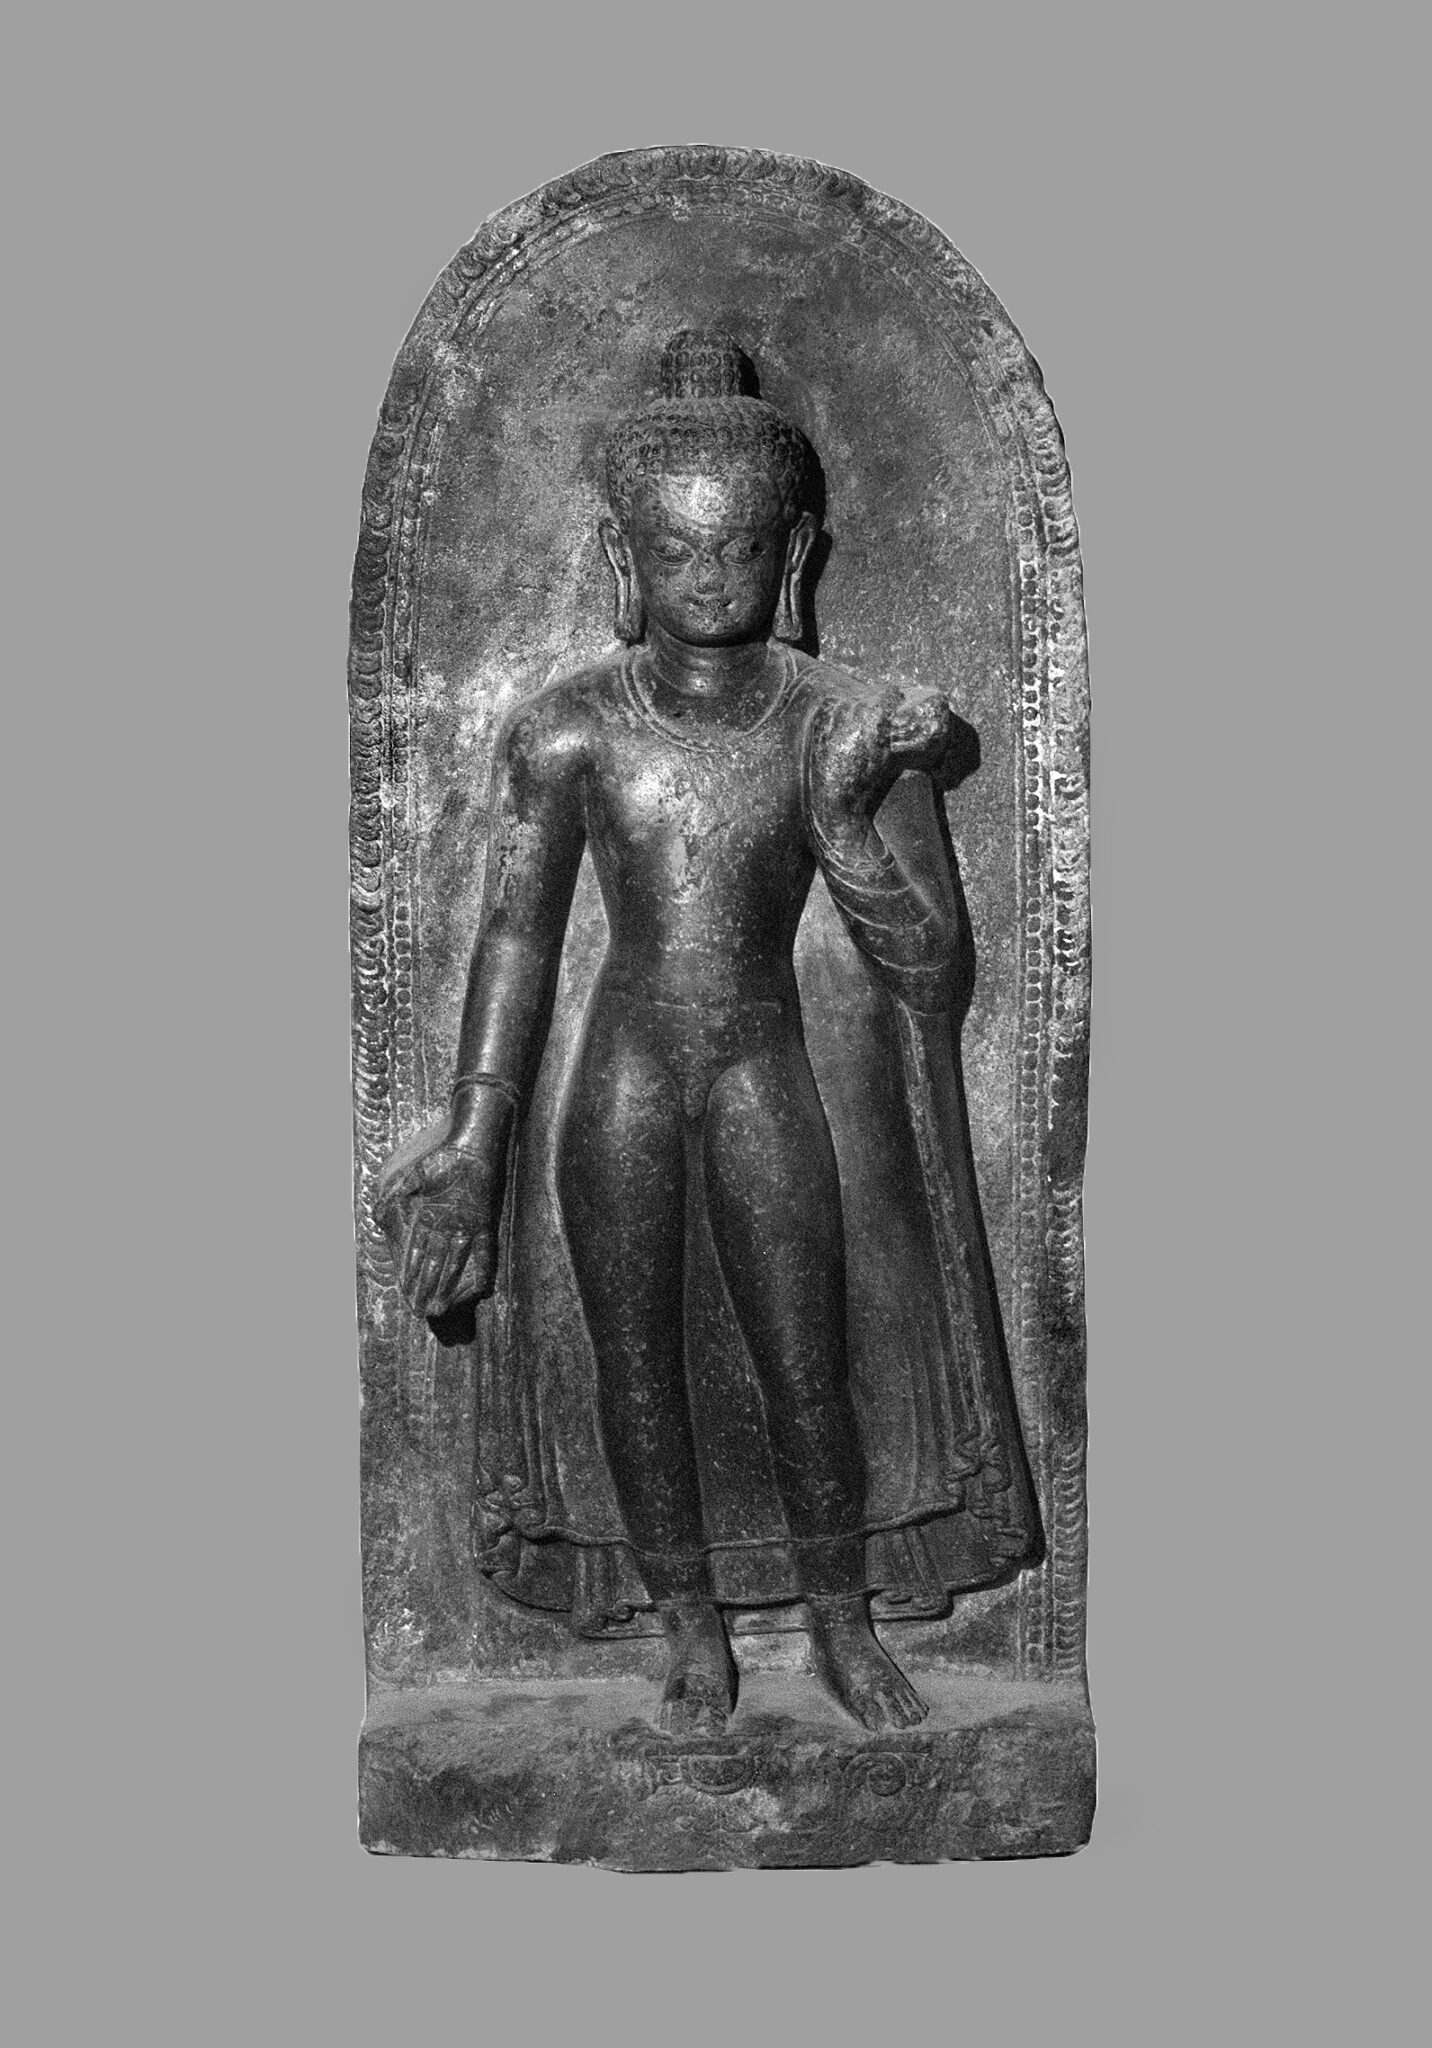 Black and white photograph of relief sculpture depicting Buddha wearing sheer tunic standing in contrapposto